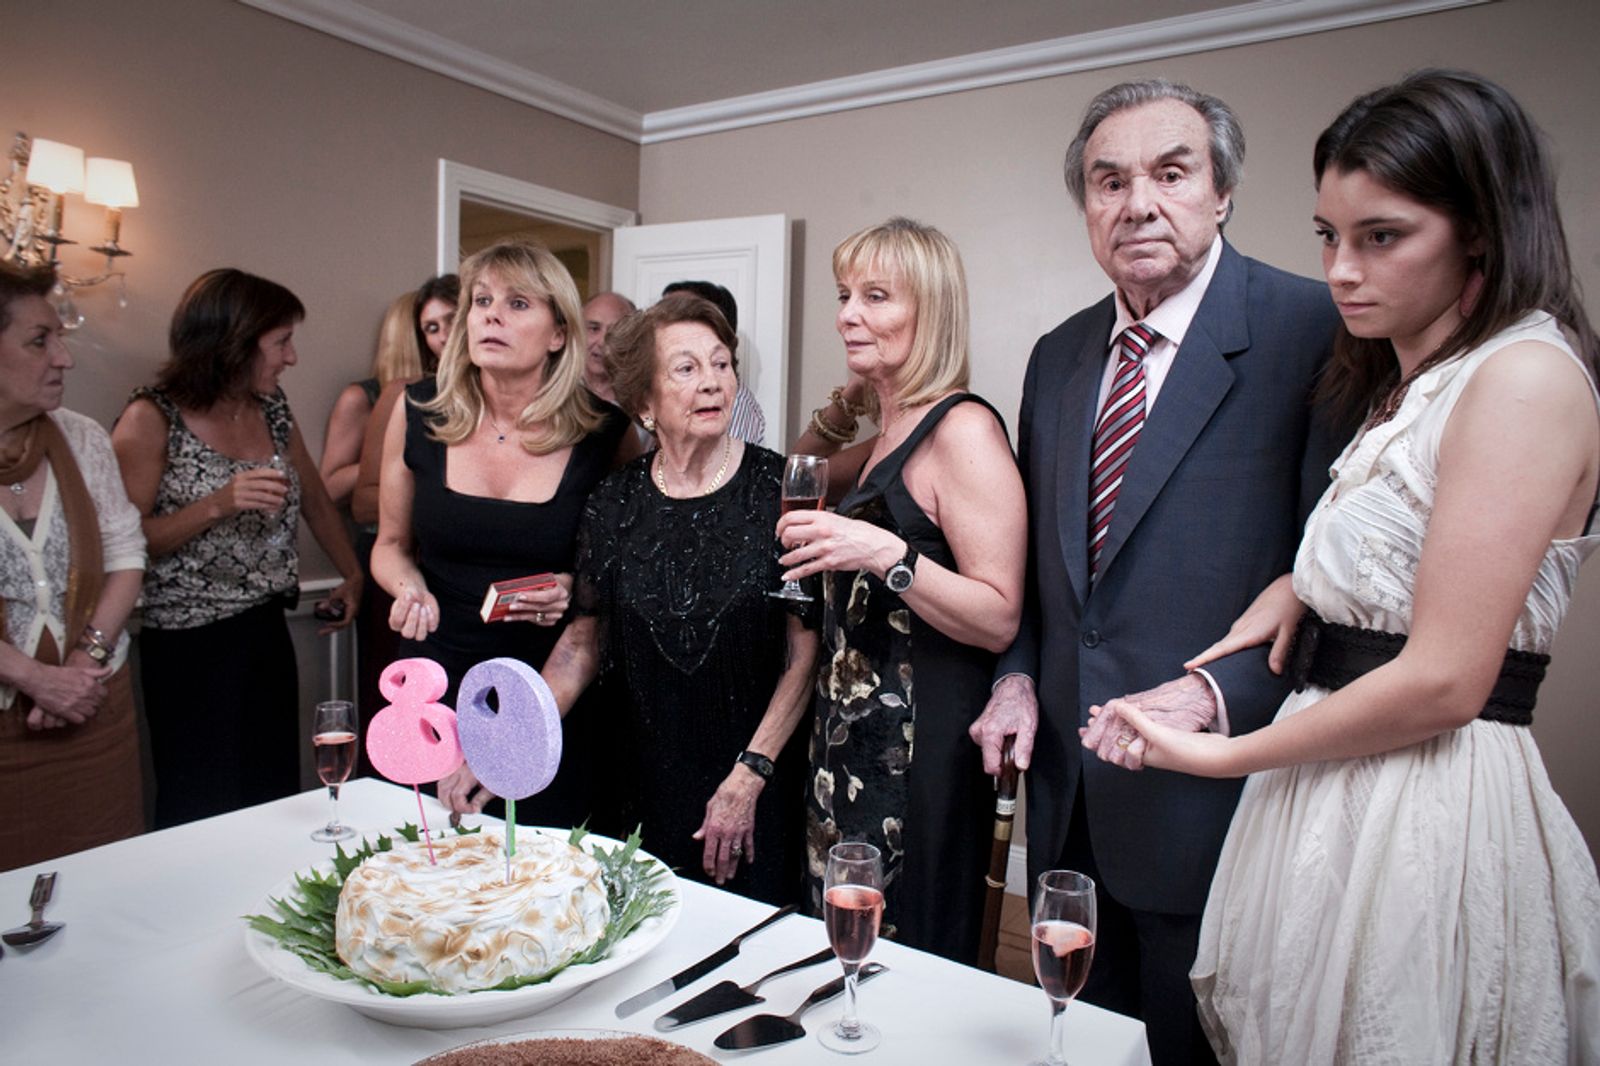 © Cooperativa Sub - From left to right, Silvina Bossi, her mother, her sister, her father and her daughter Mercedes.